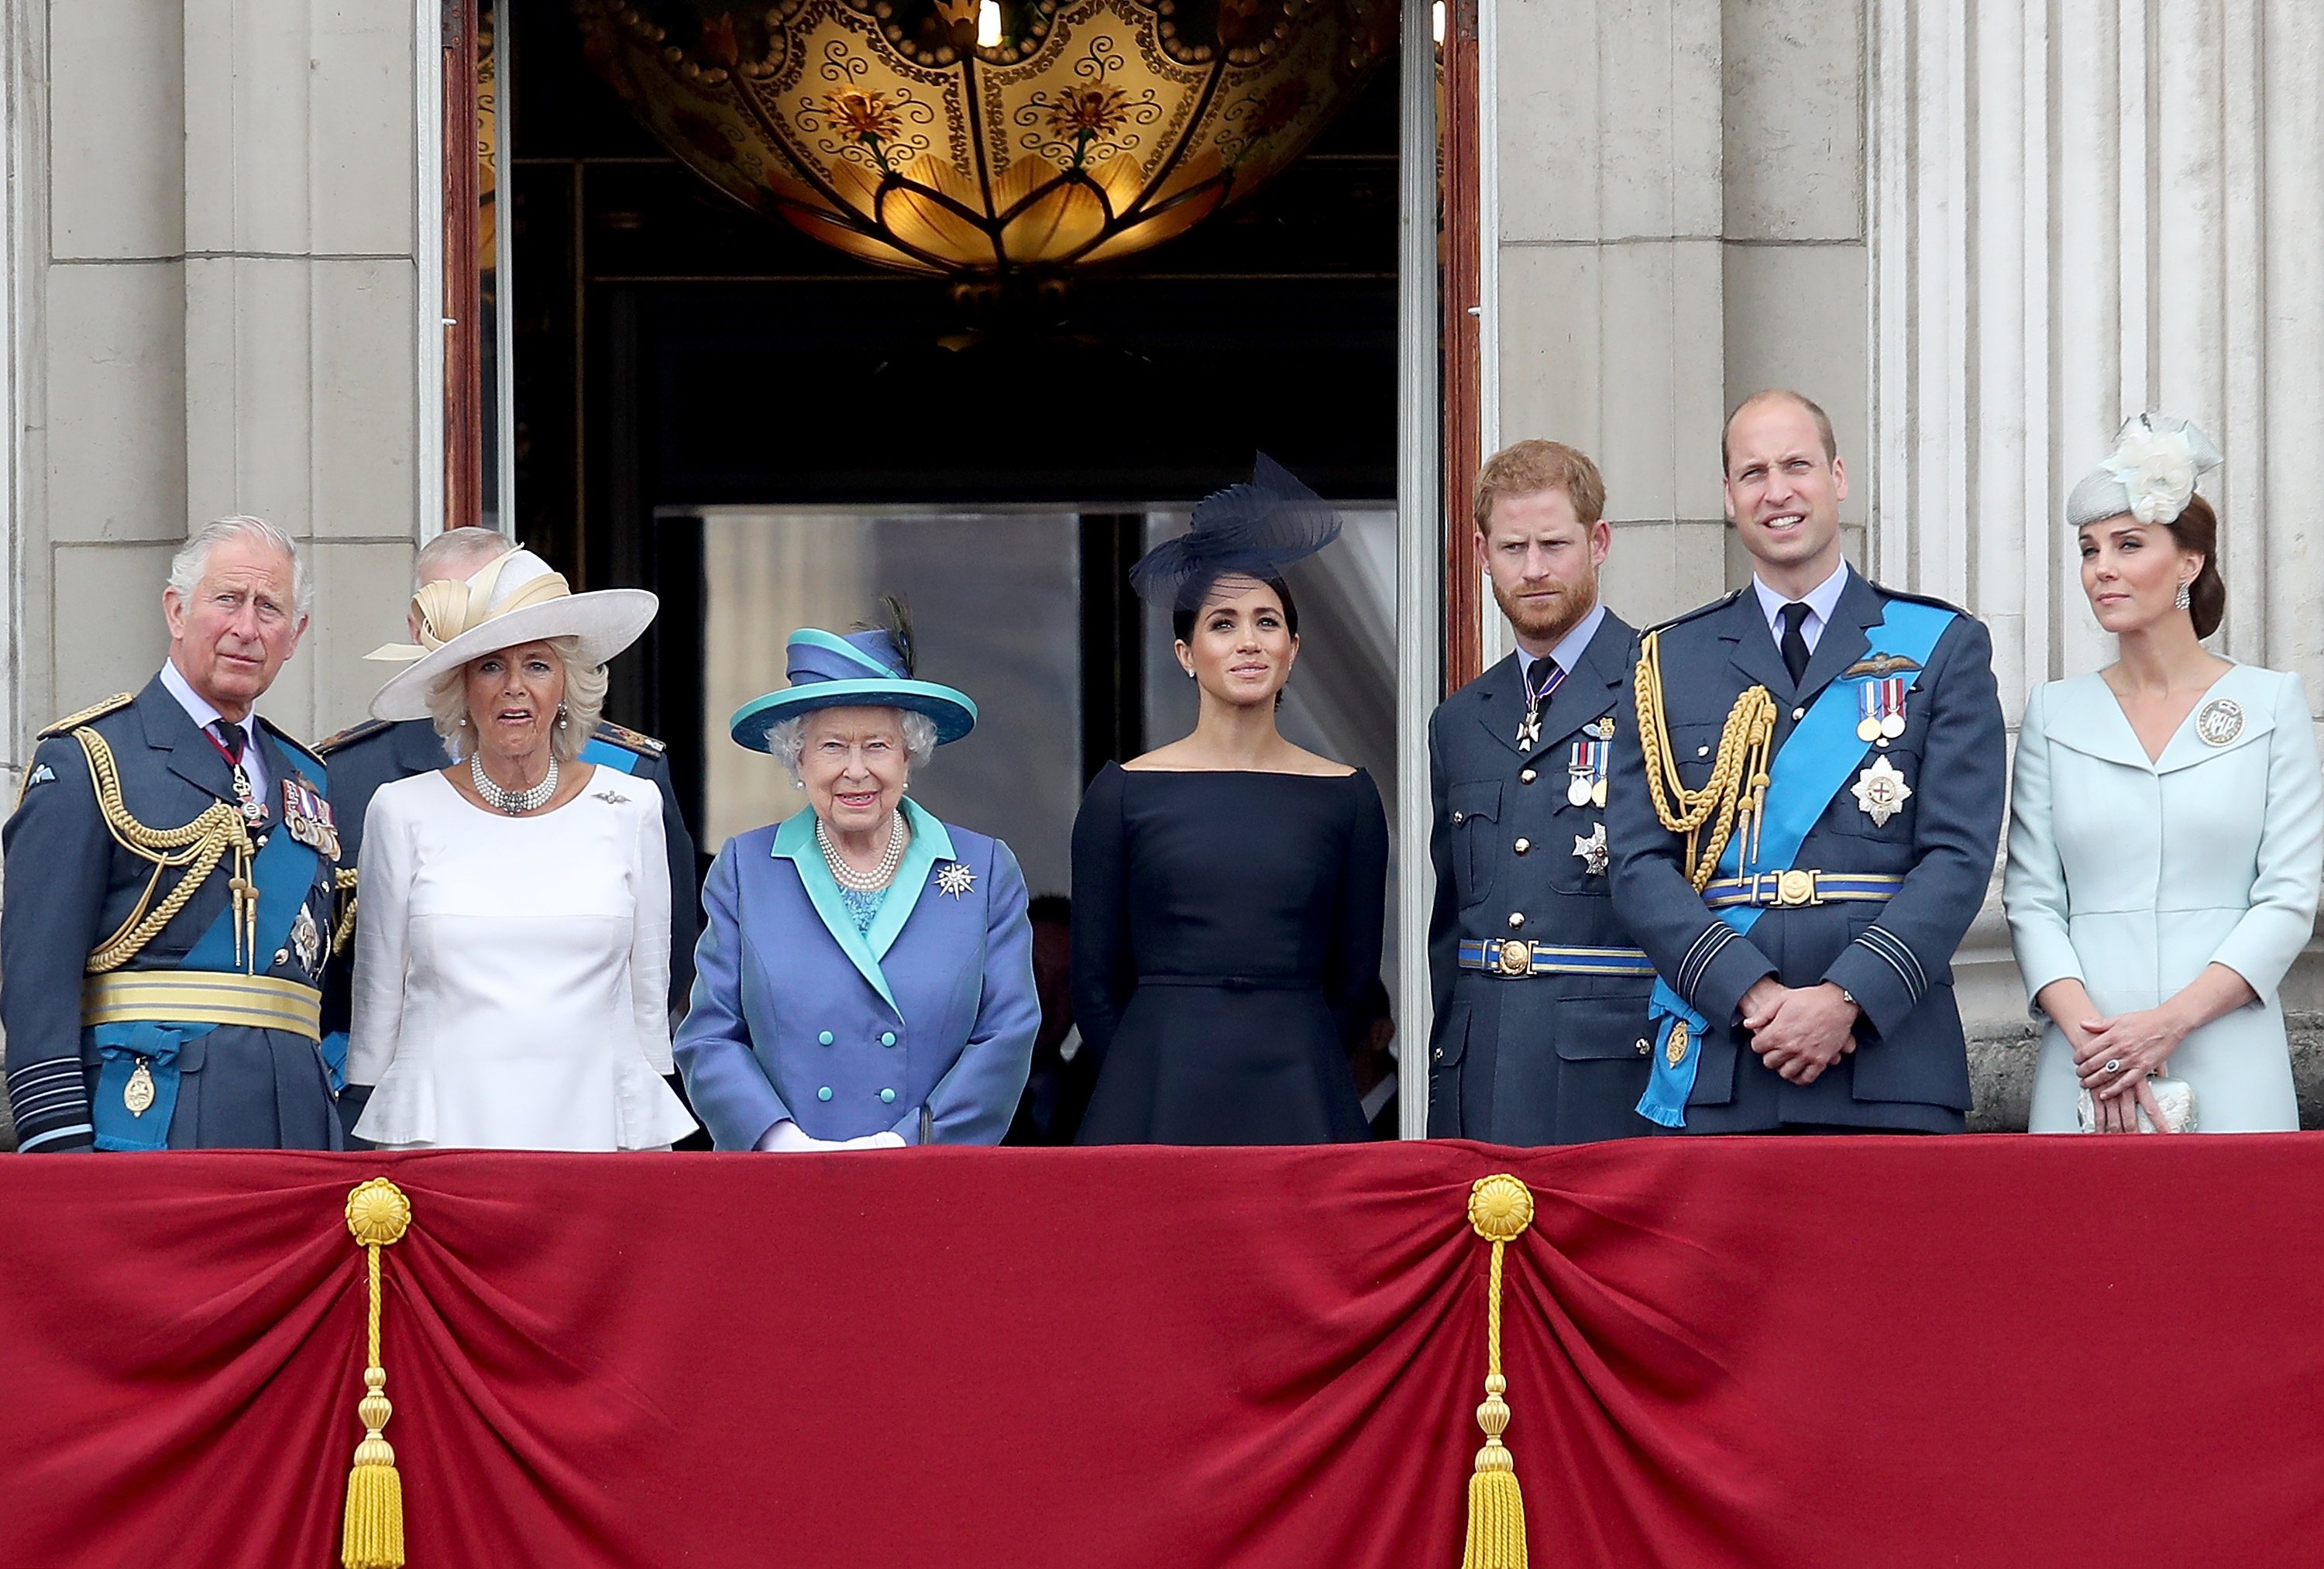  Prince Charles, Prince of Wales, Camilla, Duchess of Cornwall, Queen Elizabeth II, Meghan, Duchess of Sussex, Prince Harry, Duke of Sussex, Prince William, Duke of Cambridge and Catherine, Duchess of Cambridge watch the RAF flypast on the balcony of Buckingham Palace, as members of the Royal Family attend events to mark the centenary of the RAF on July 10, 2018 in London, England. | Source: Getty Images